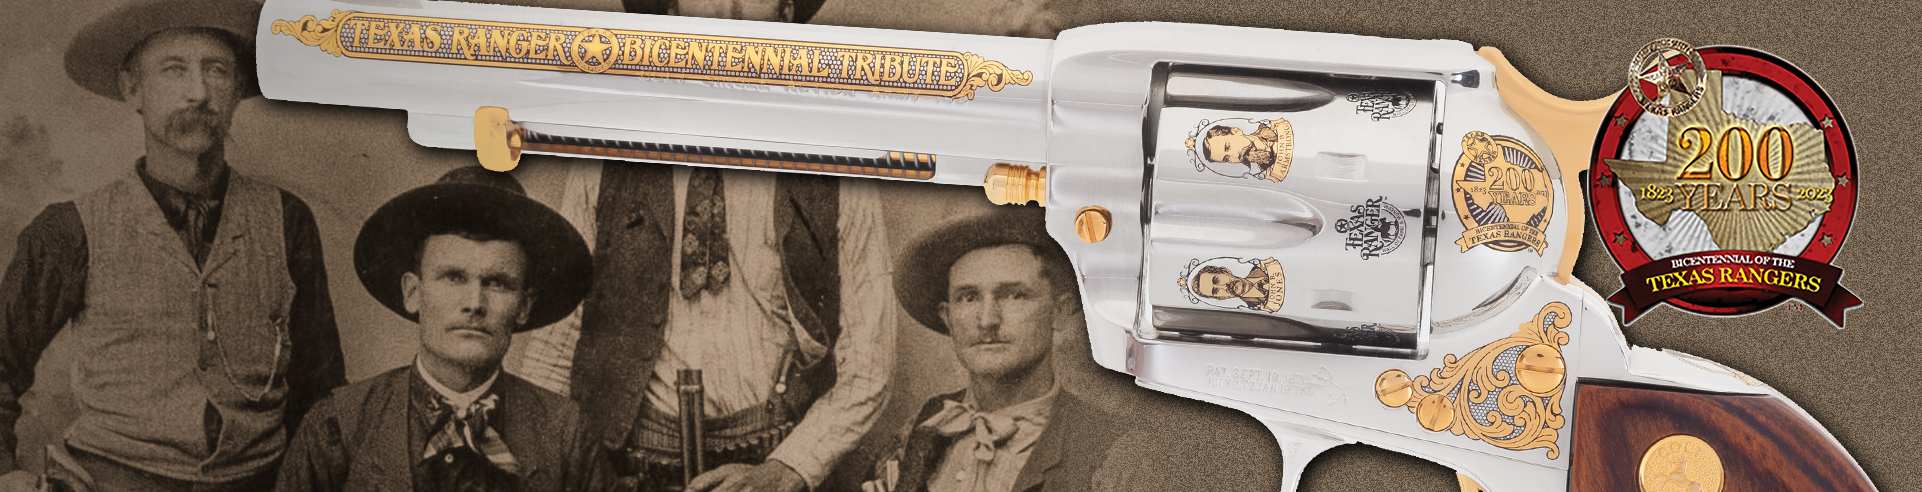 The Texas Ranger Bicentennial Tribute Colt® Single Action Army